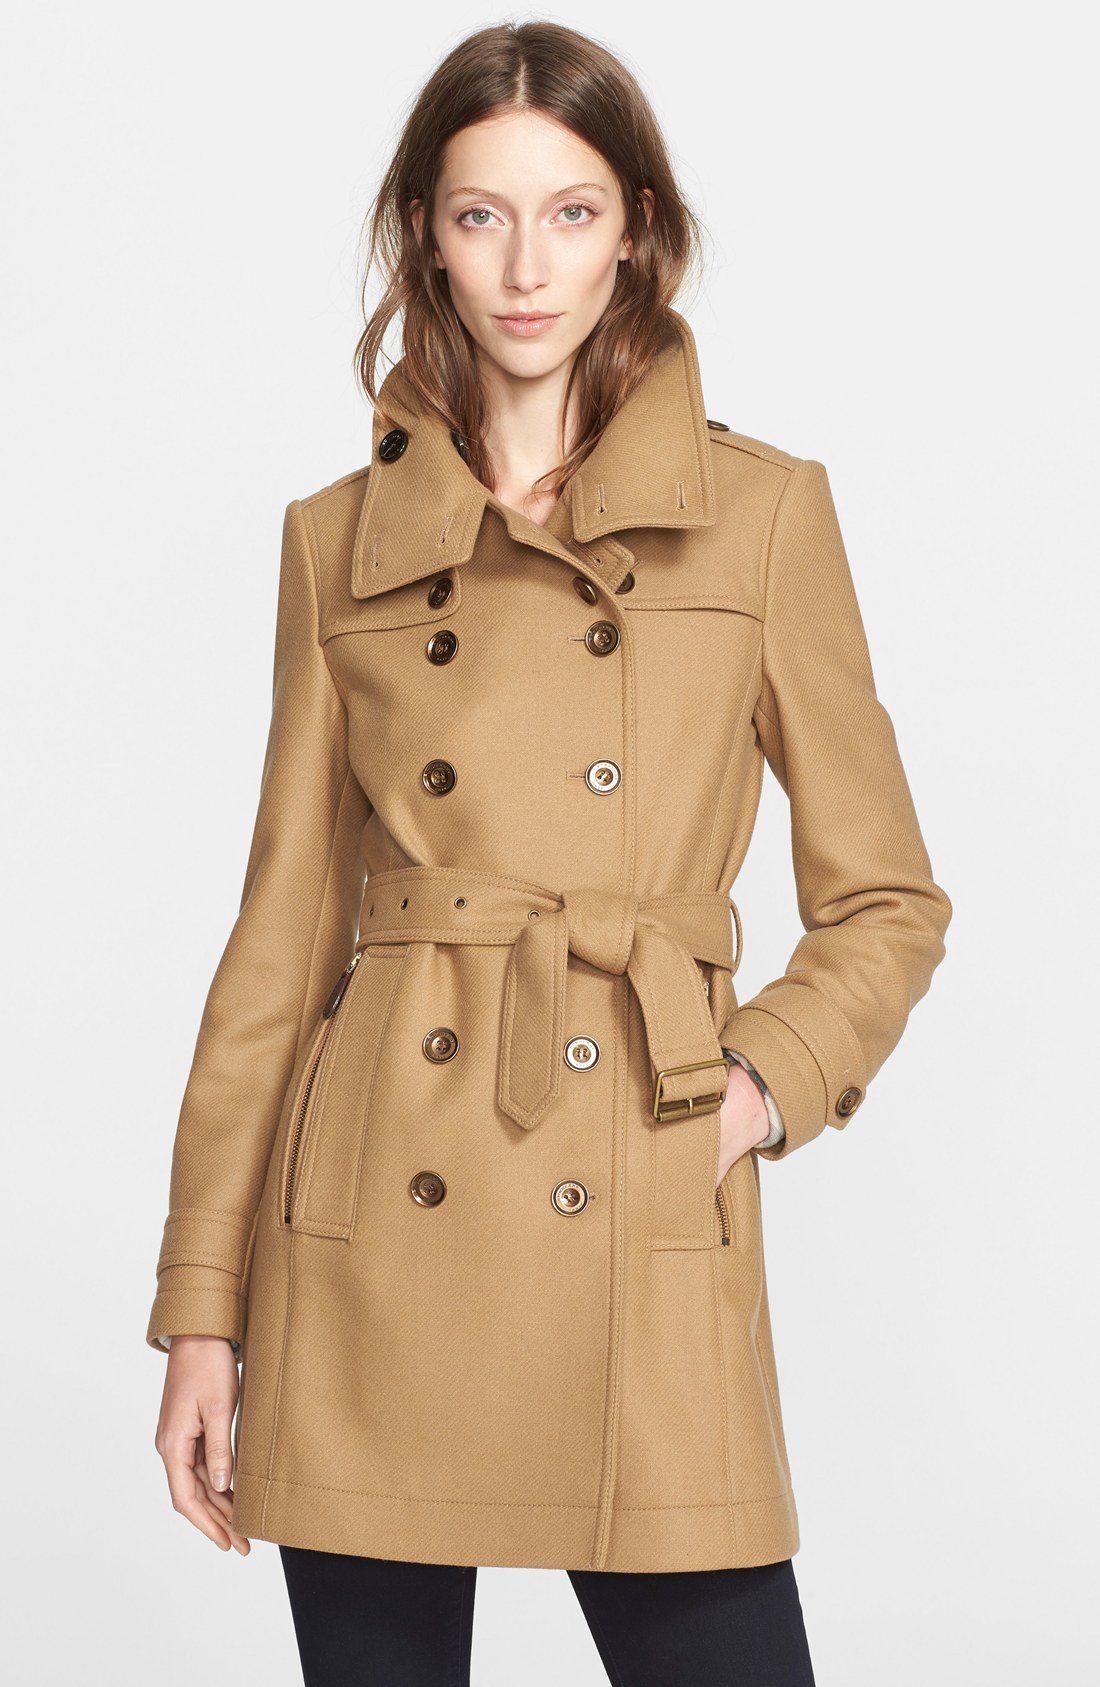 Trench Coats- What Are The Different Types Available?